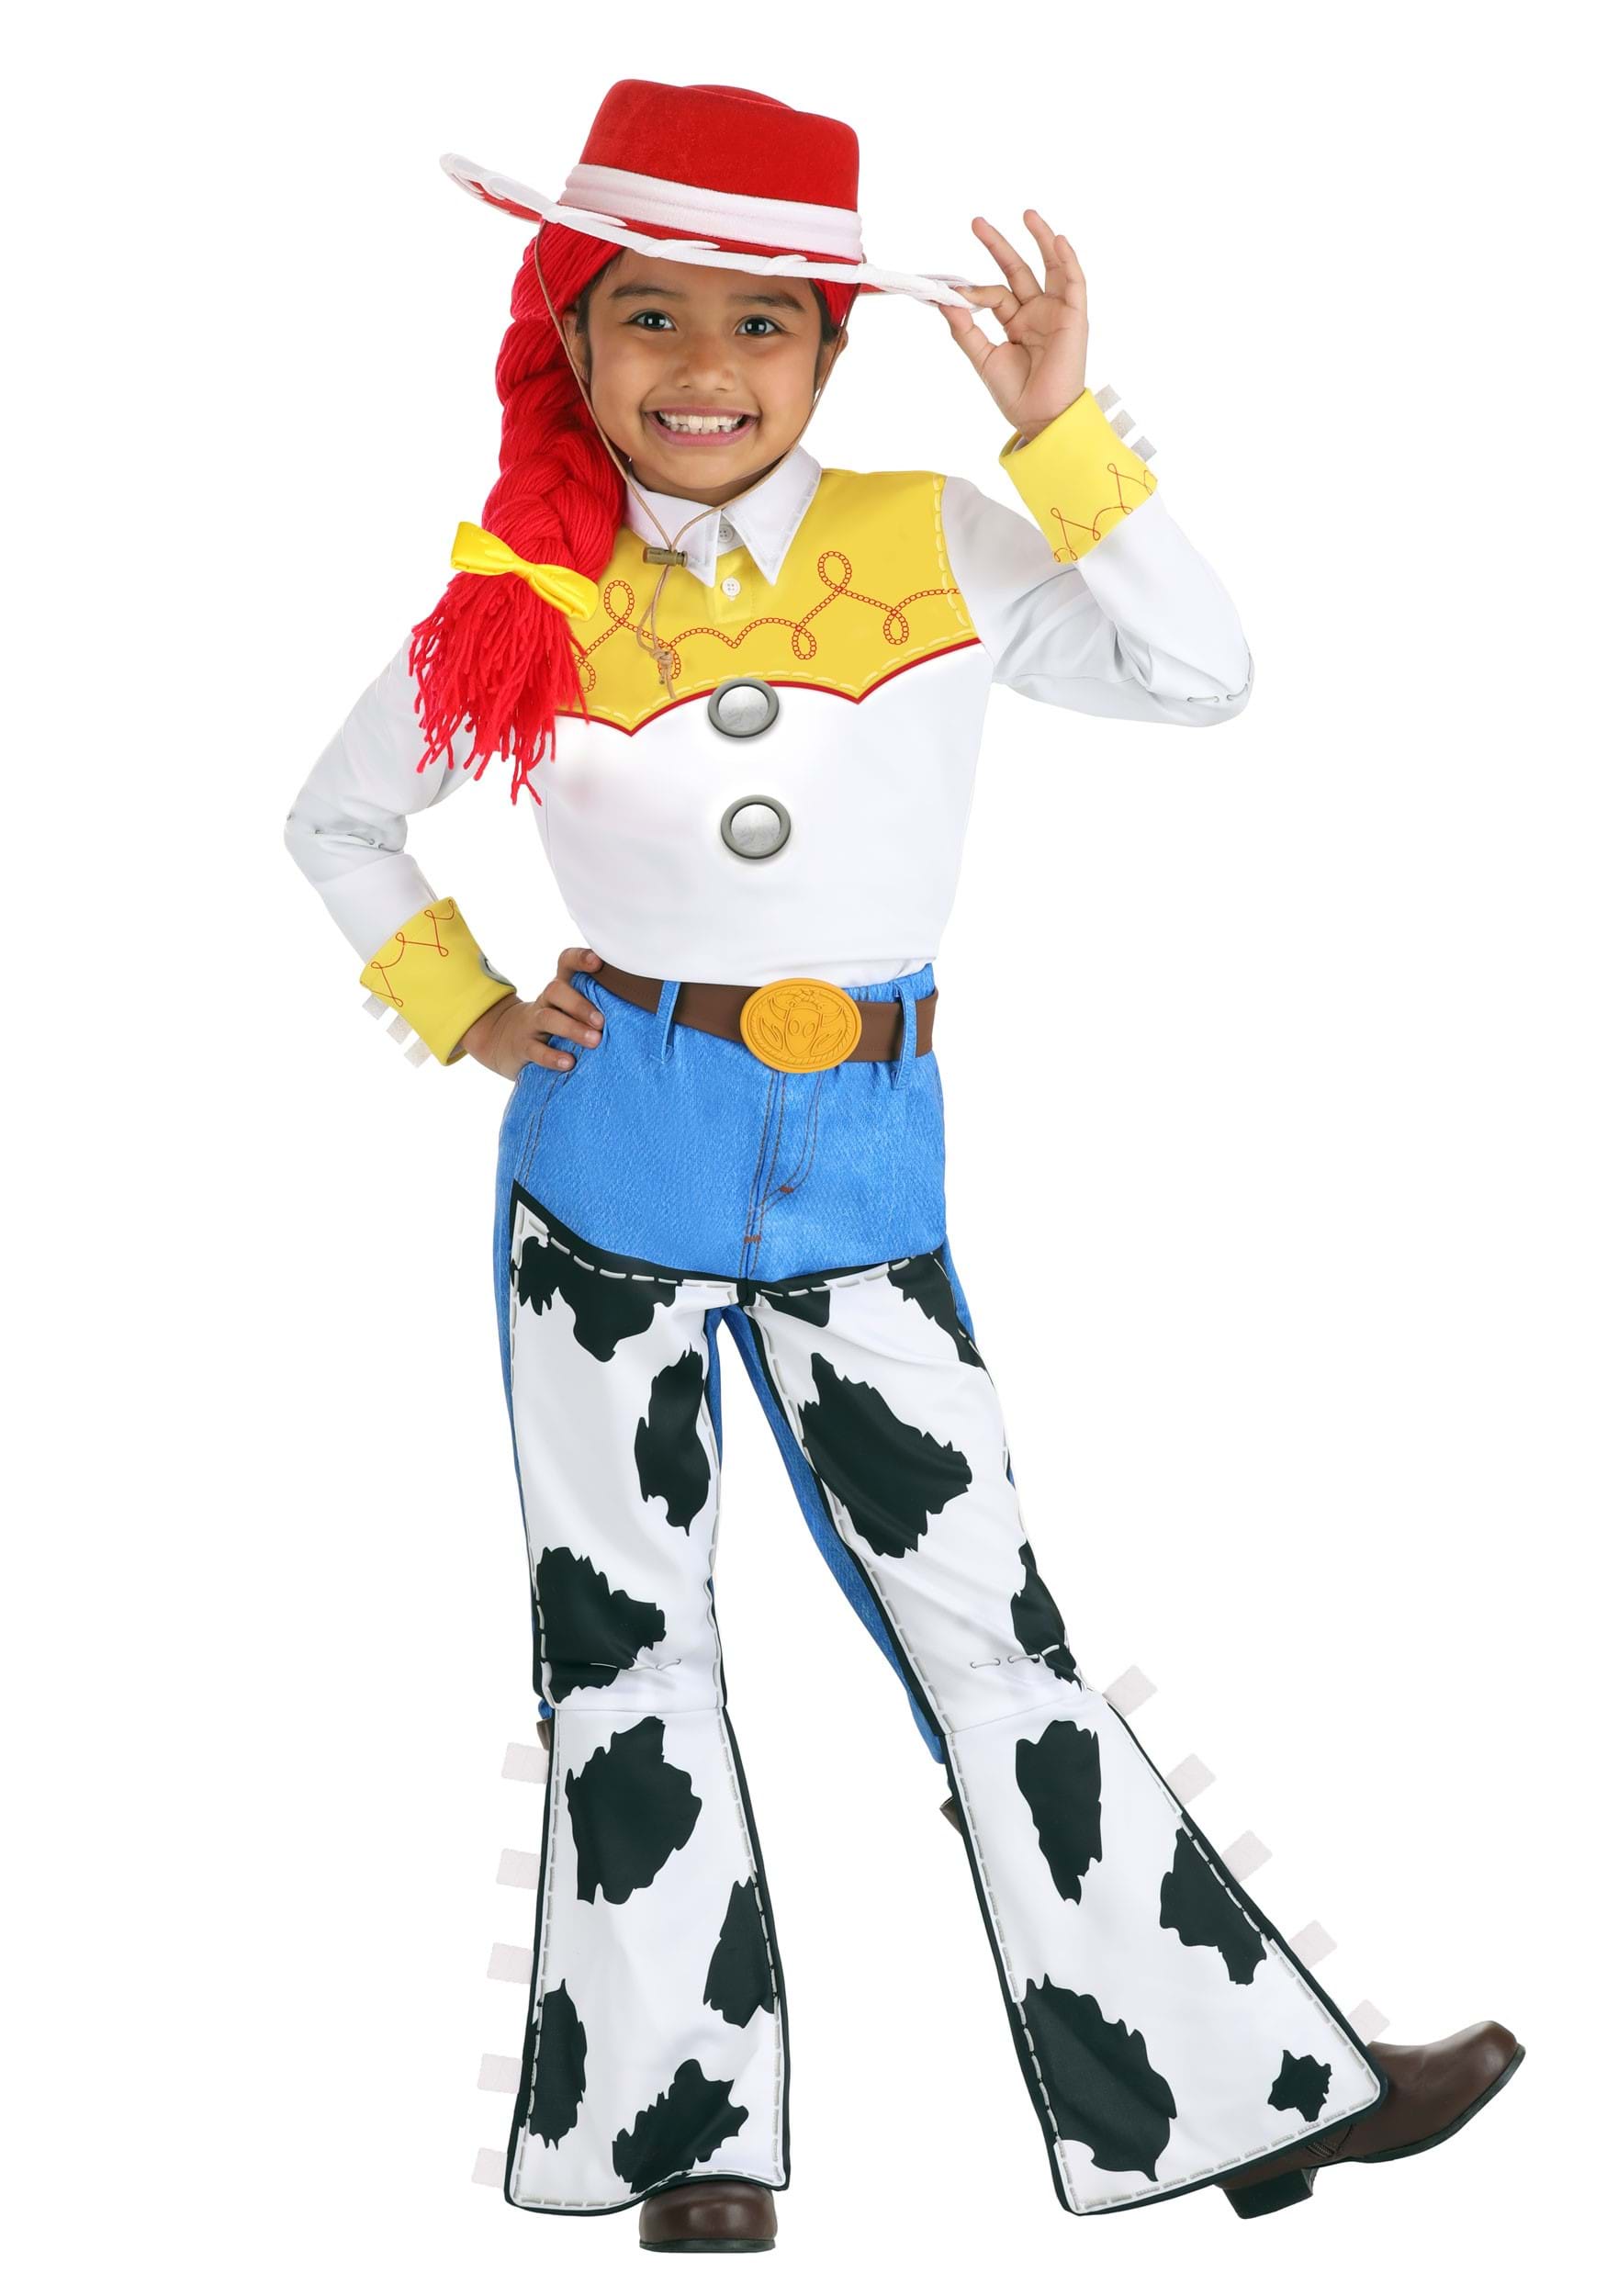 Photos - Fancy Dress Deluxe FUN Costumes Girl's  Jessie Toy Story Costume Blue/White/Yel 